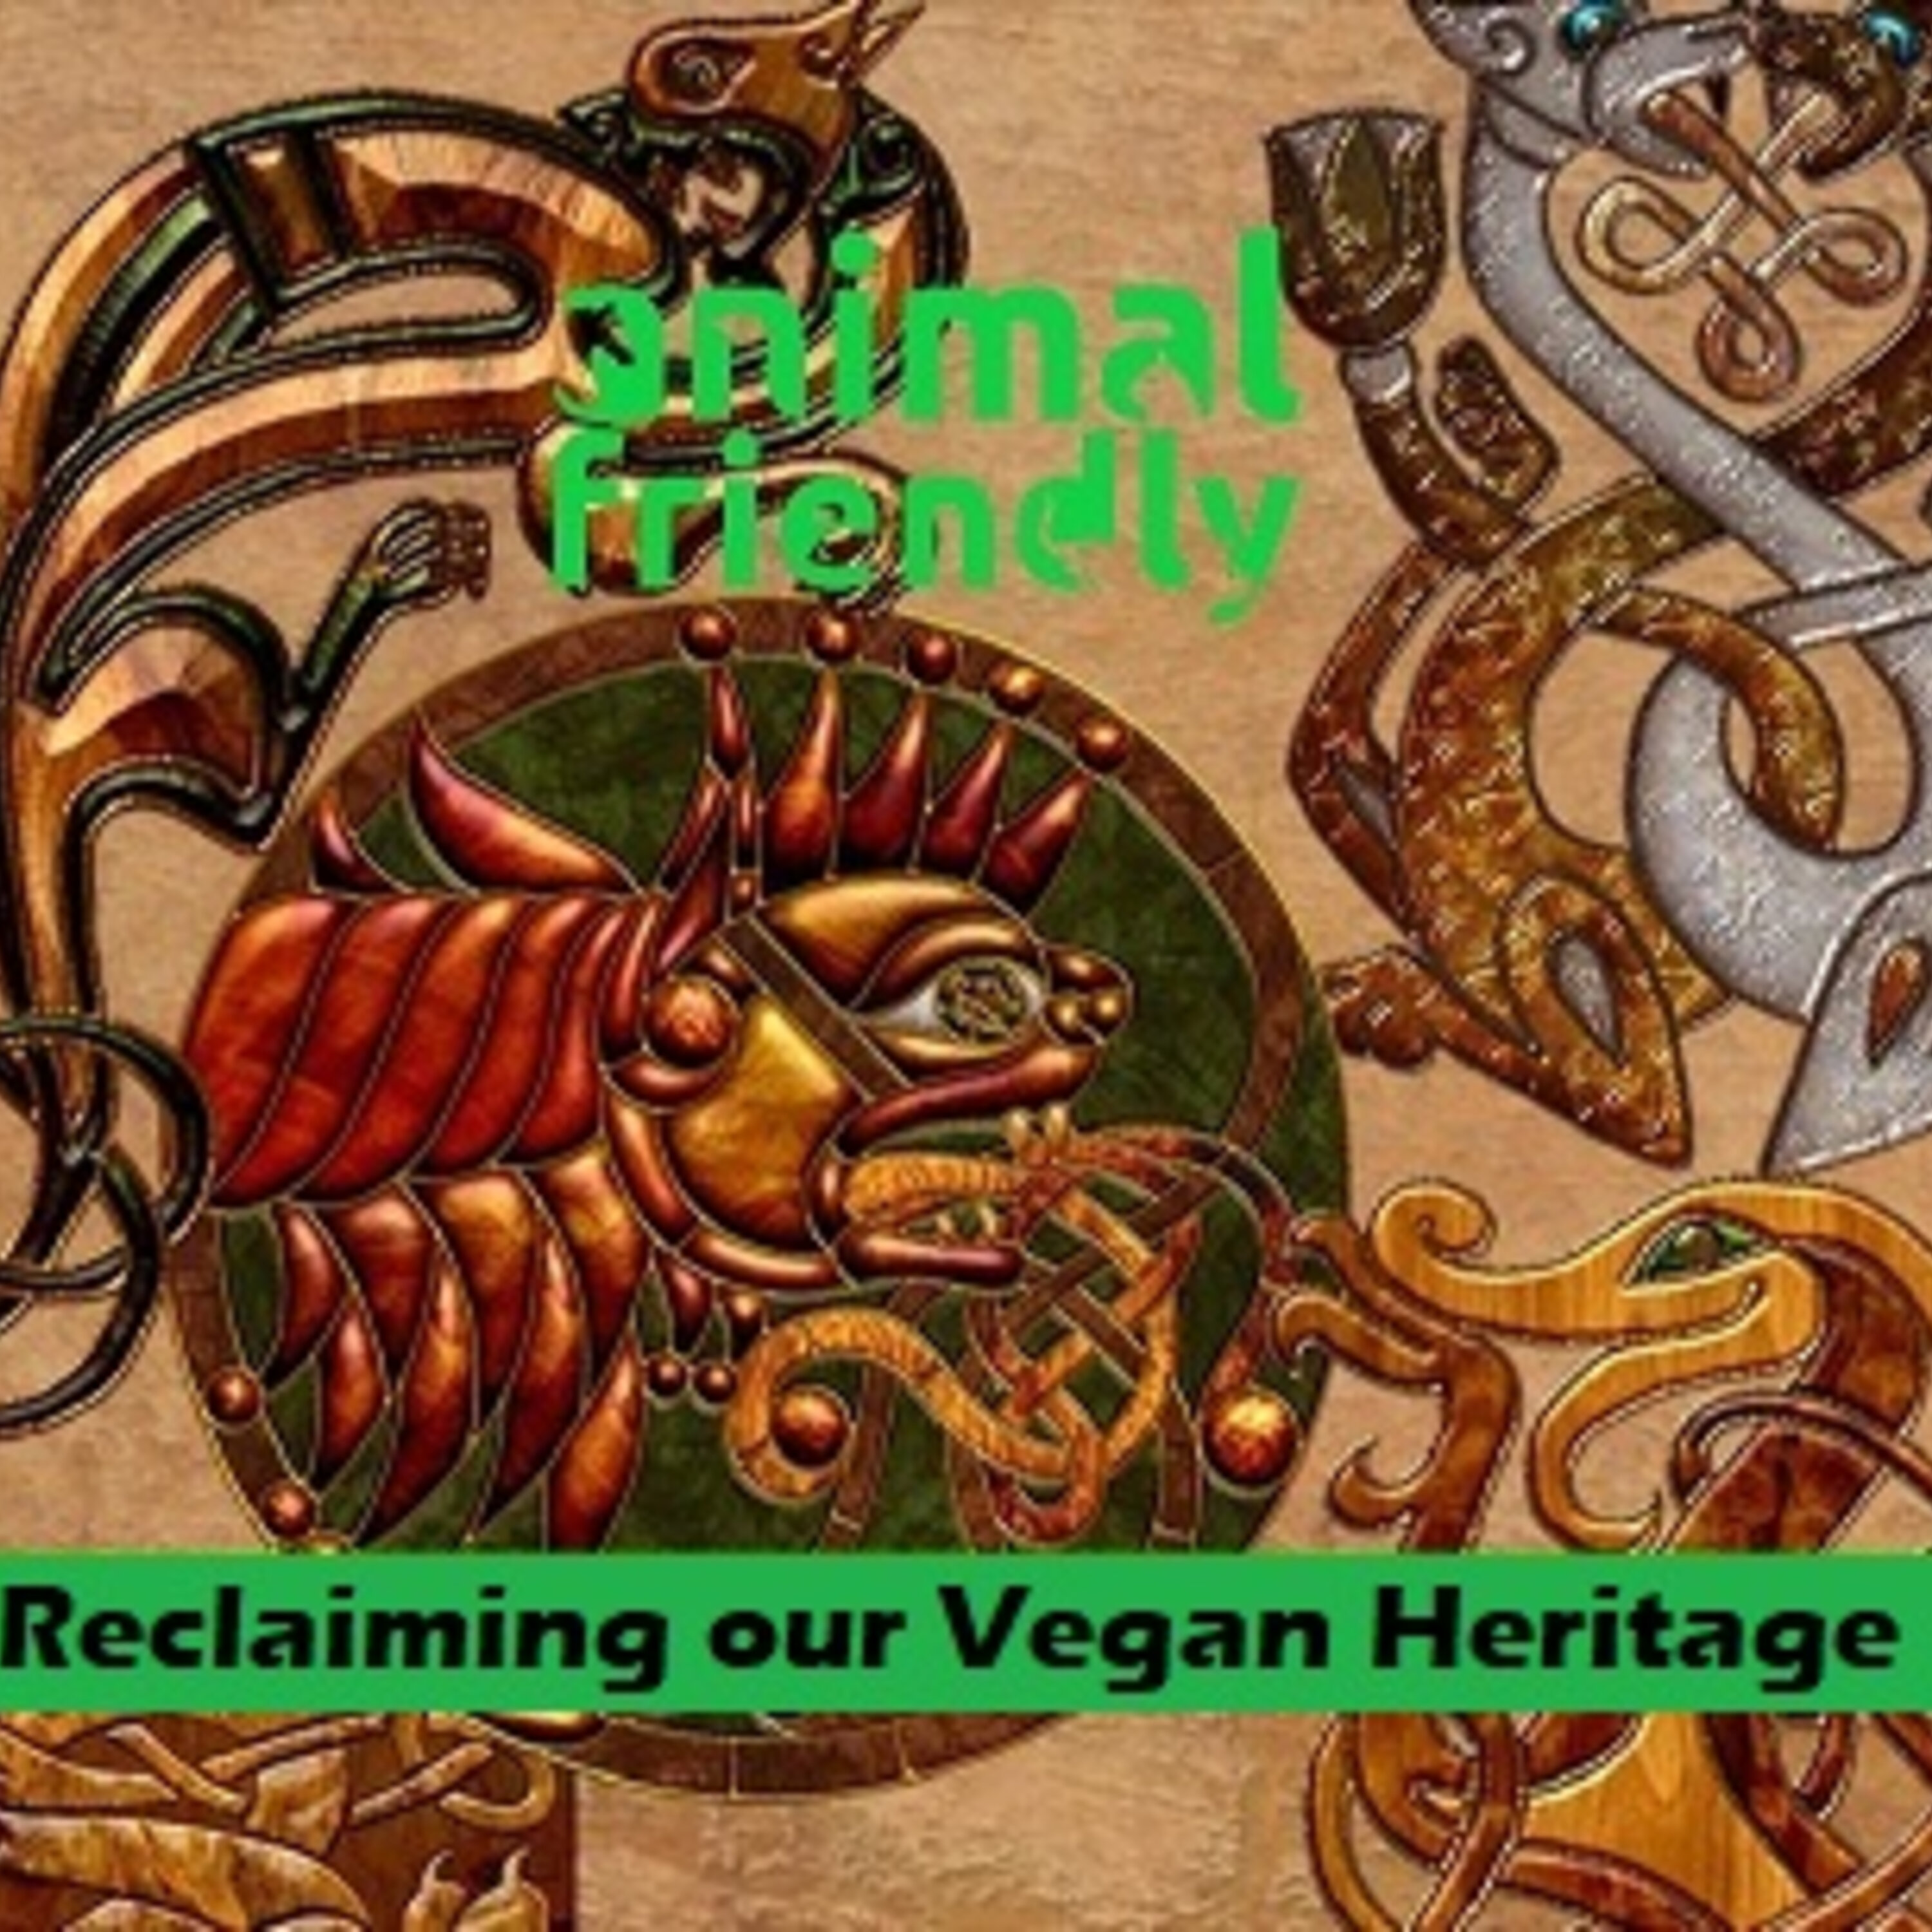 7. Reclaiming Our Vegan Heritage Image